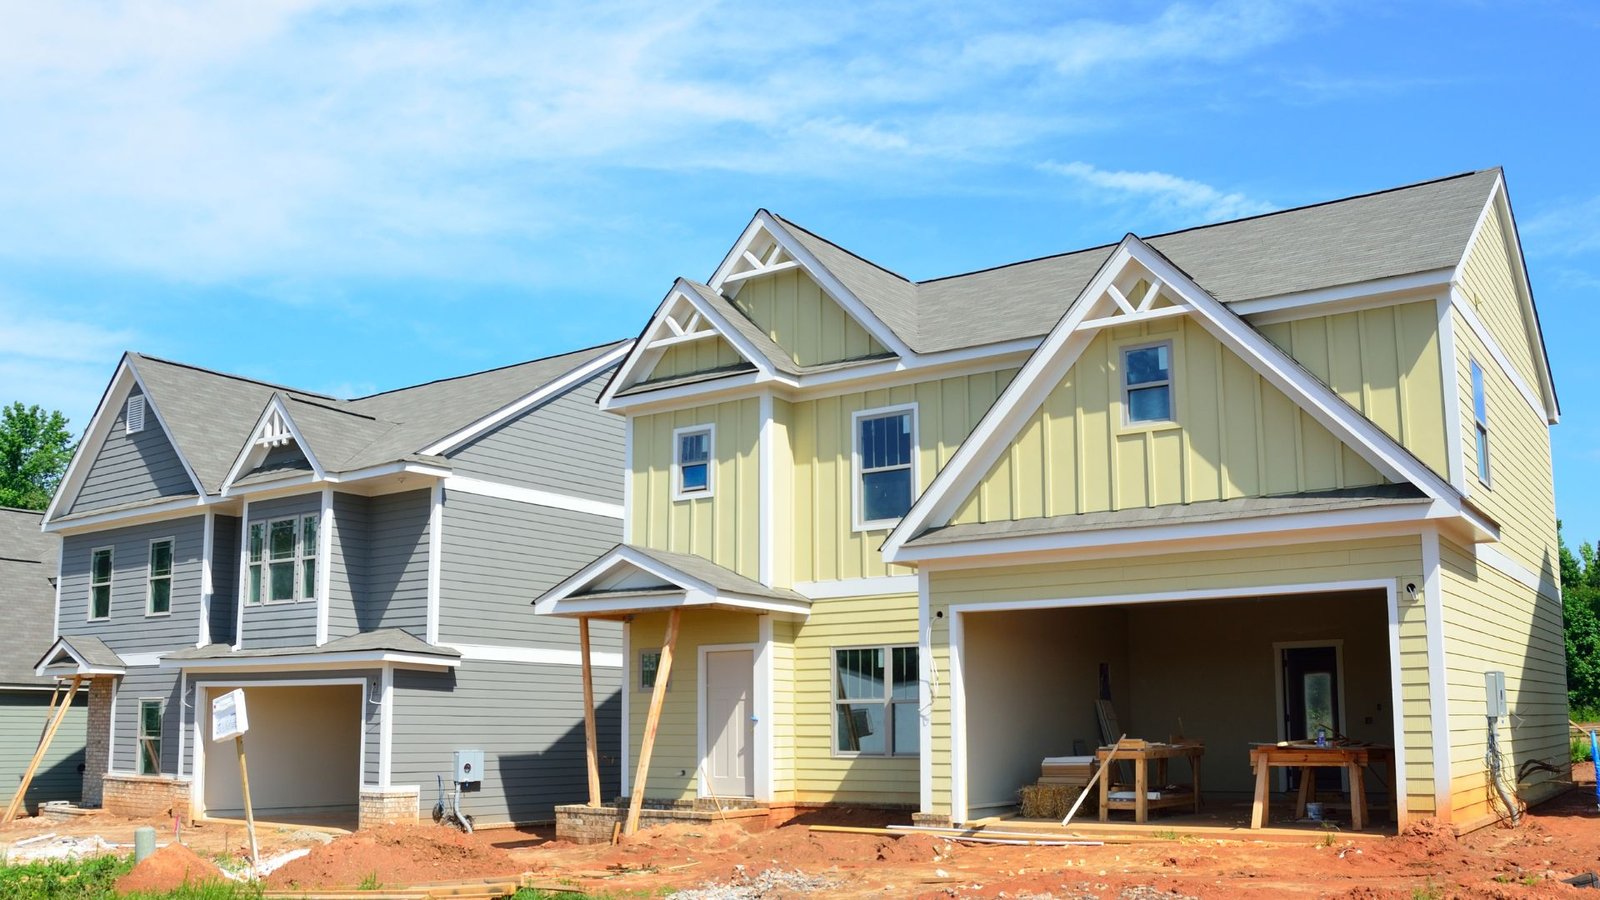 How to Find New Construction Homes Near Me Space